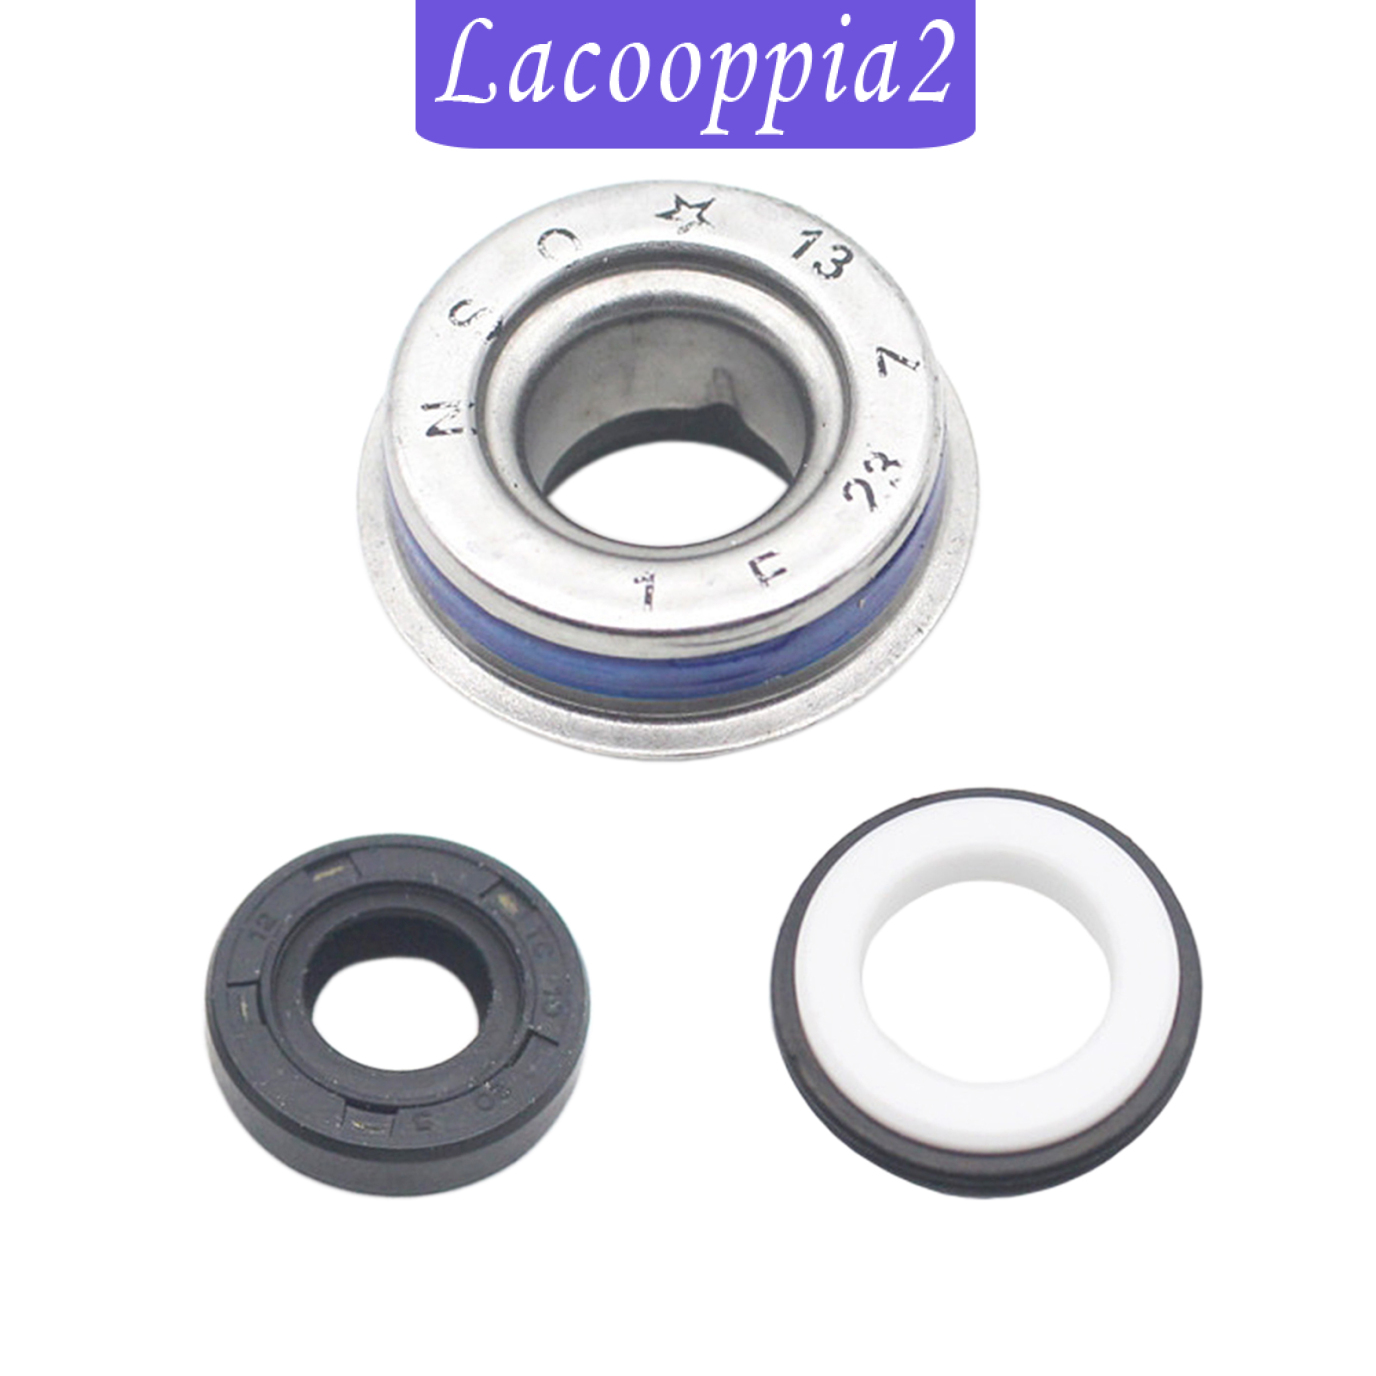 [LACOOPPIA2]Motorcycle Water Pump Oil Seal Shock Absorber Oil Seals Sets Accessories